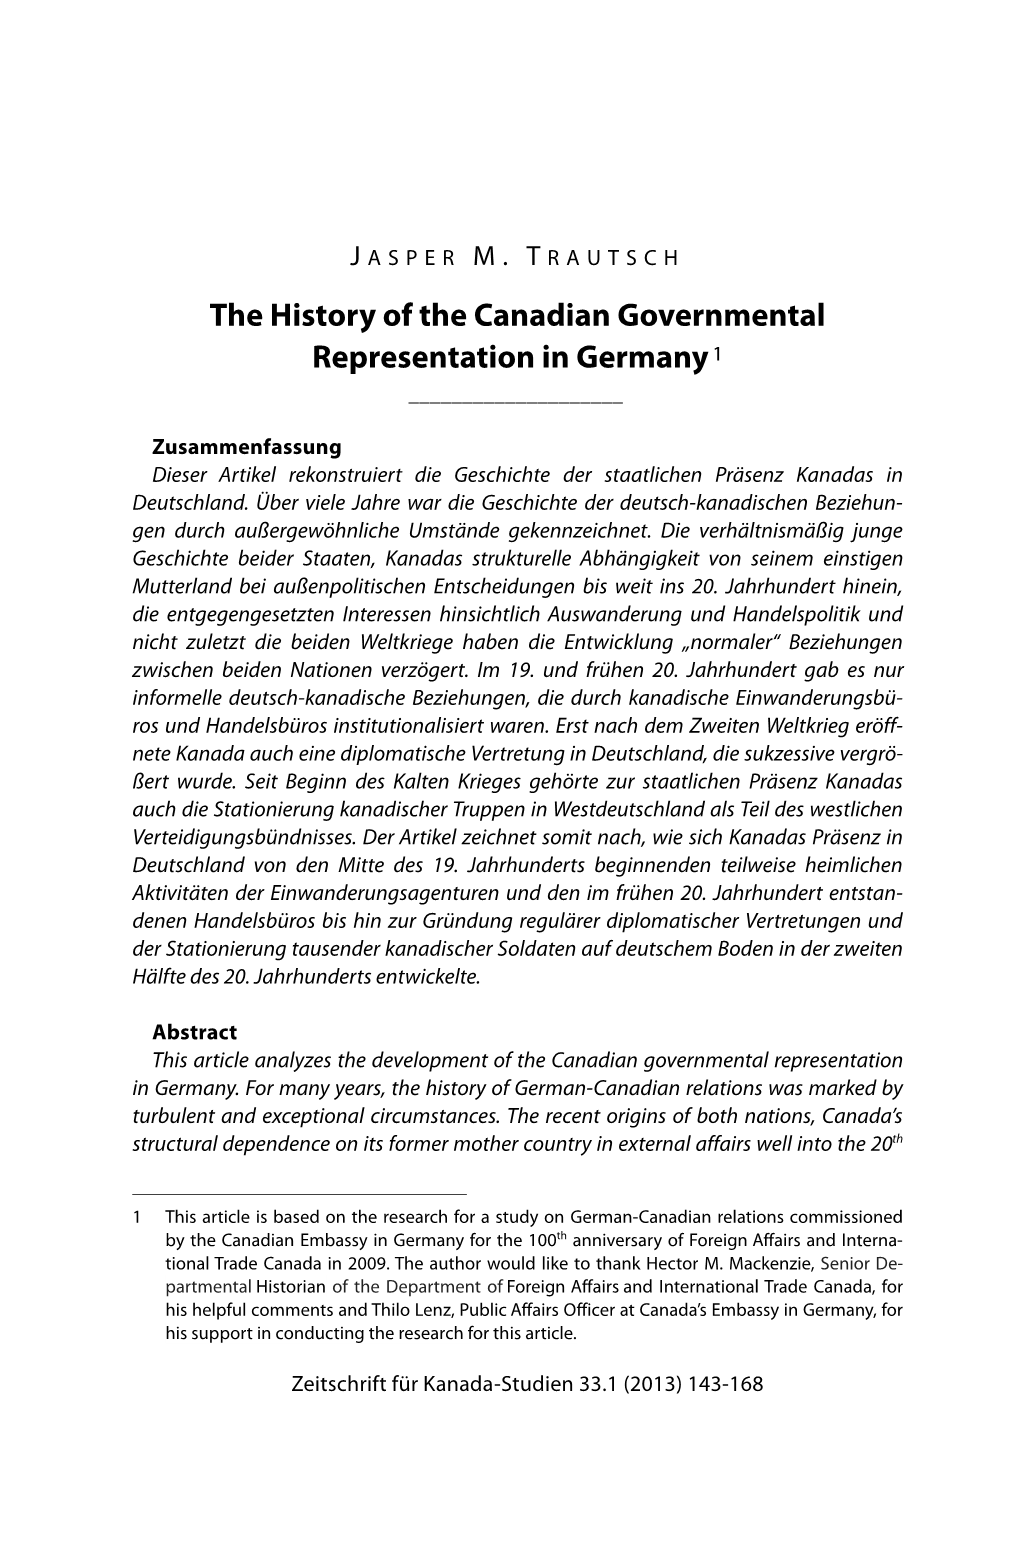 The History of the Canadian Governmental Representation in Germany 1